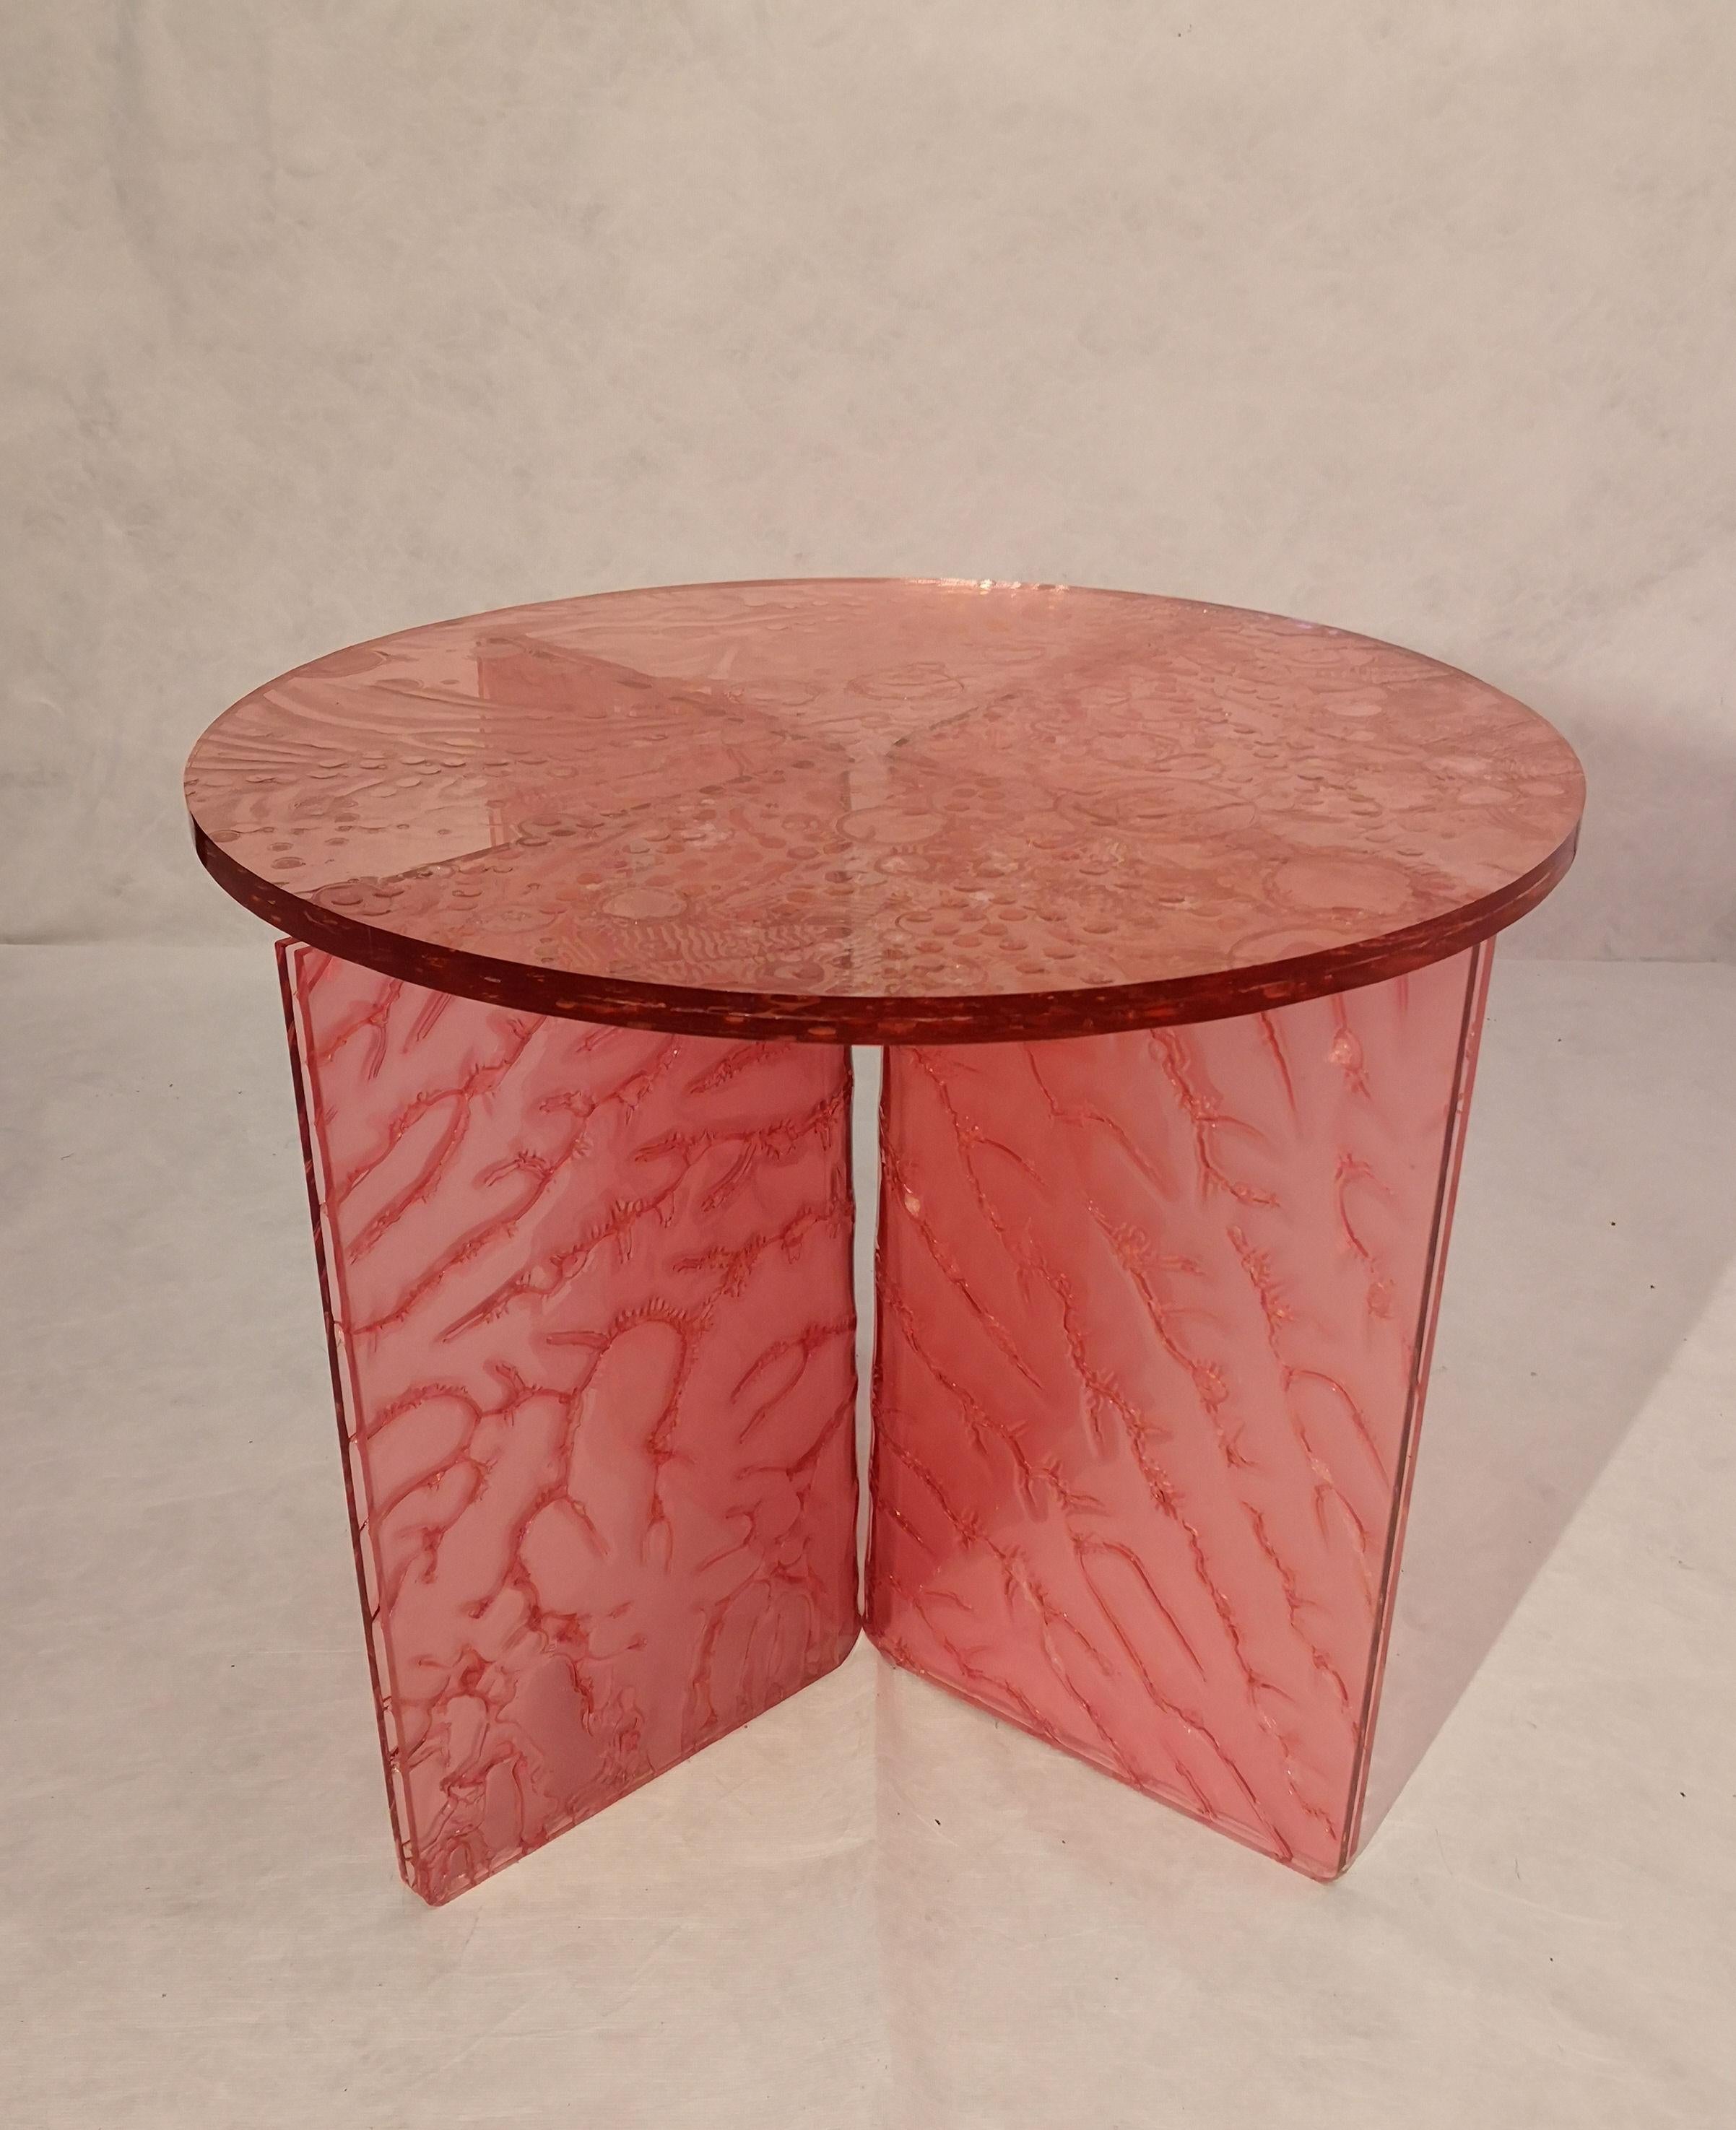 Coffee table, handmade in transparent acrylic colored with an innovative technology.
The material is made through the fusion of three plates, one of which
partially cured center.
This process creates unique and particular effects,